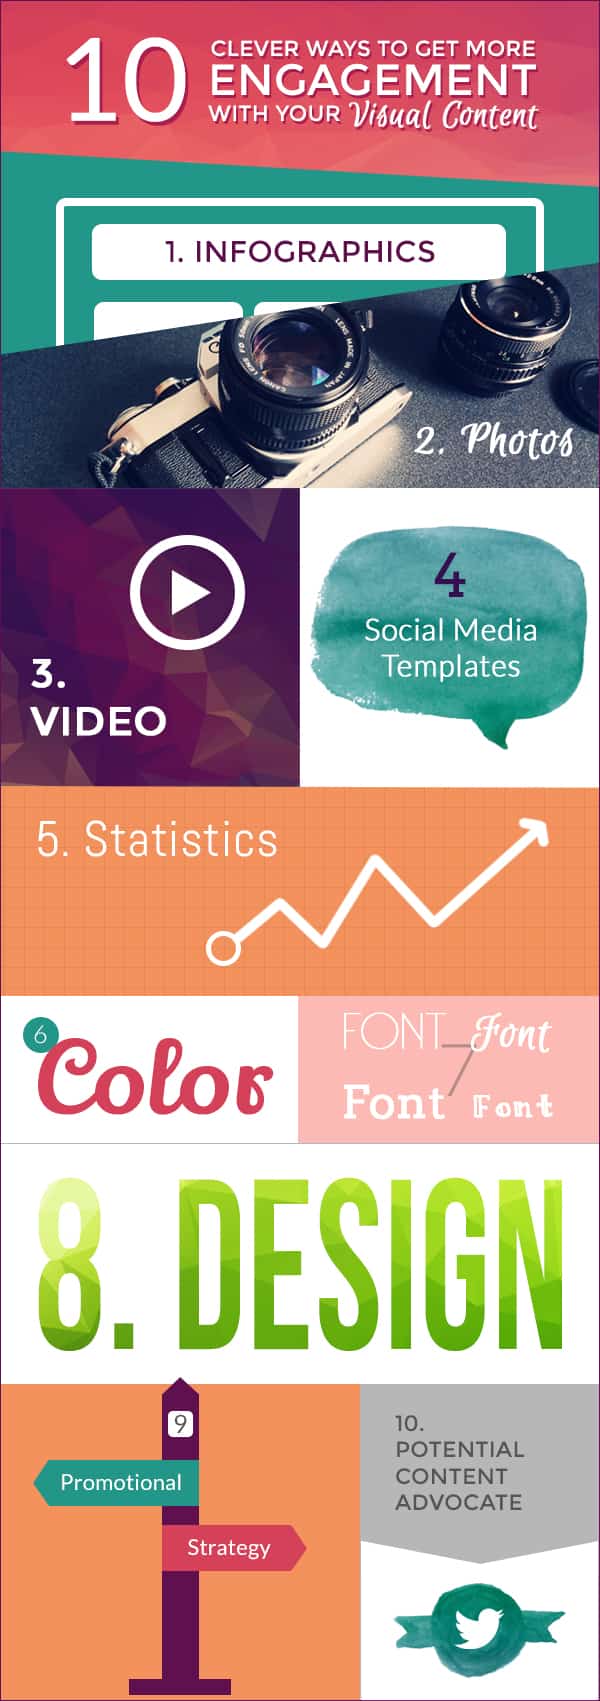 Integrating visual content into your marketing strategy.